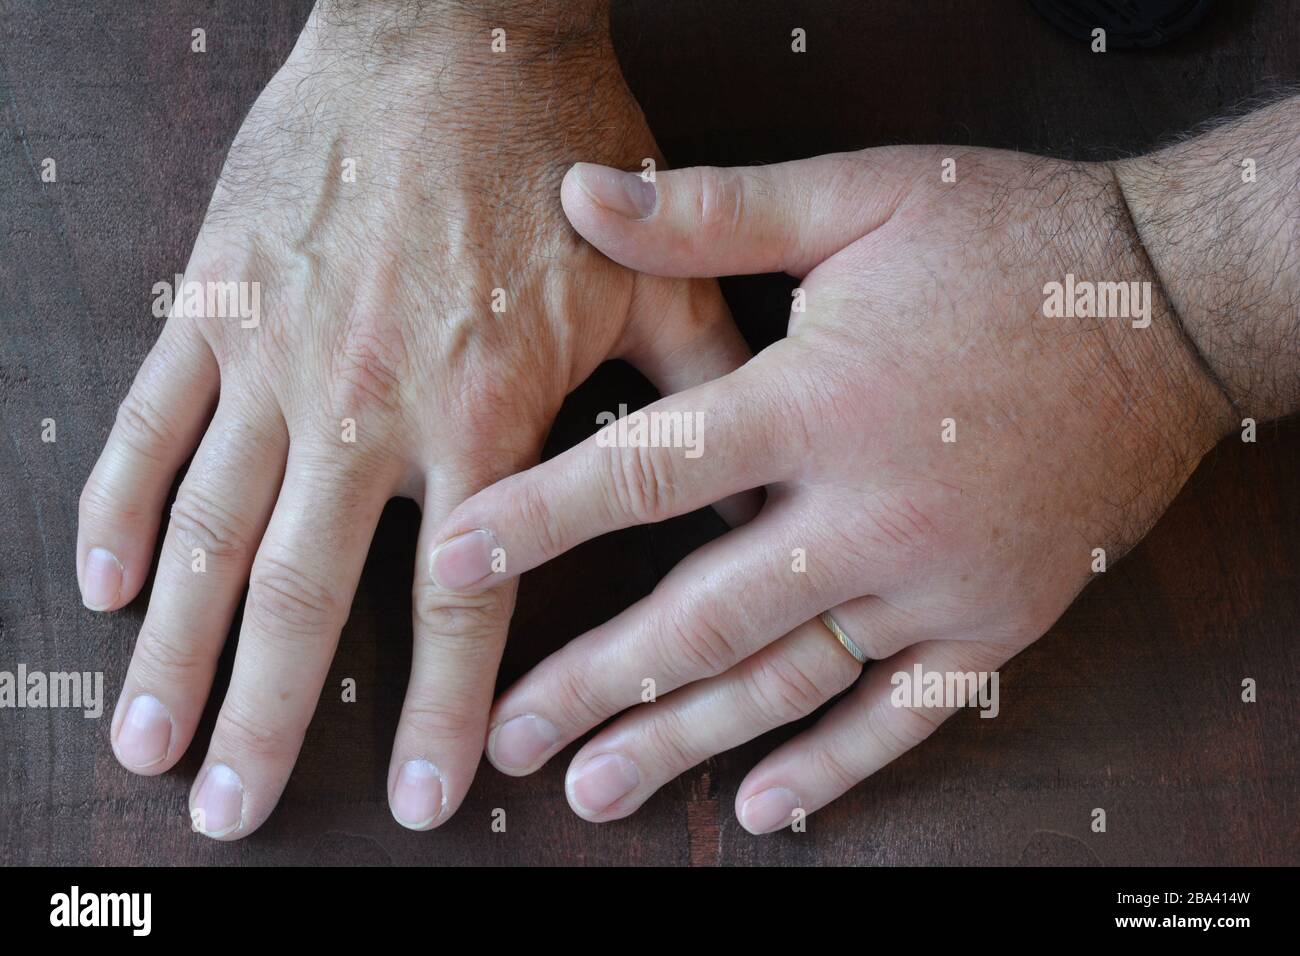 A swollen fist from a sting of a wasp compared to a healthy fist over dark wooden background, close up view Stock Photo